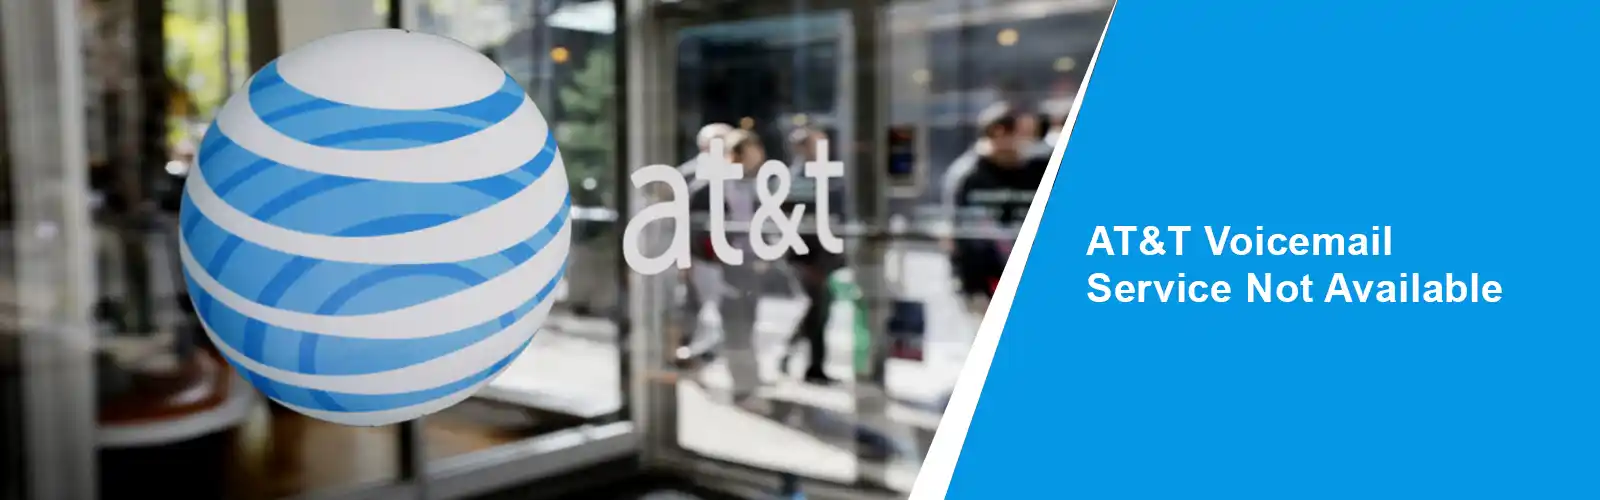 AT&T-Voicemail-Service-Not-Available